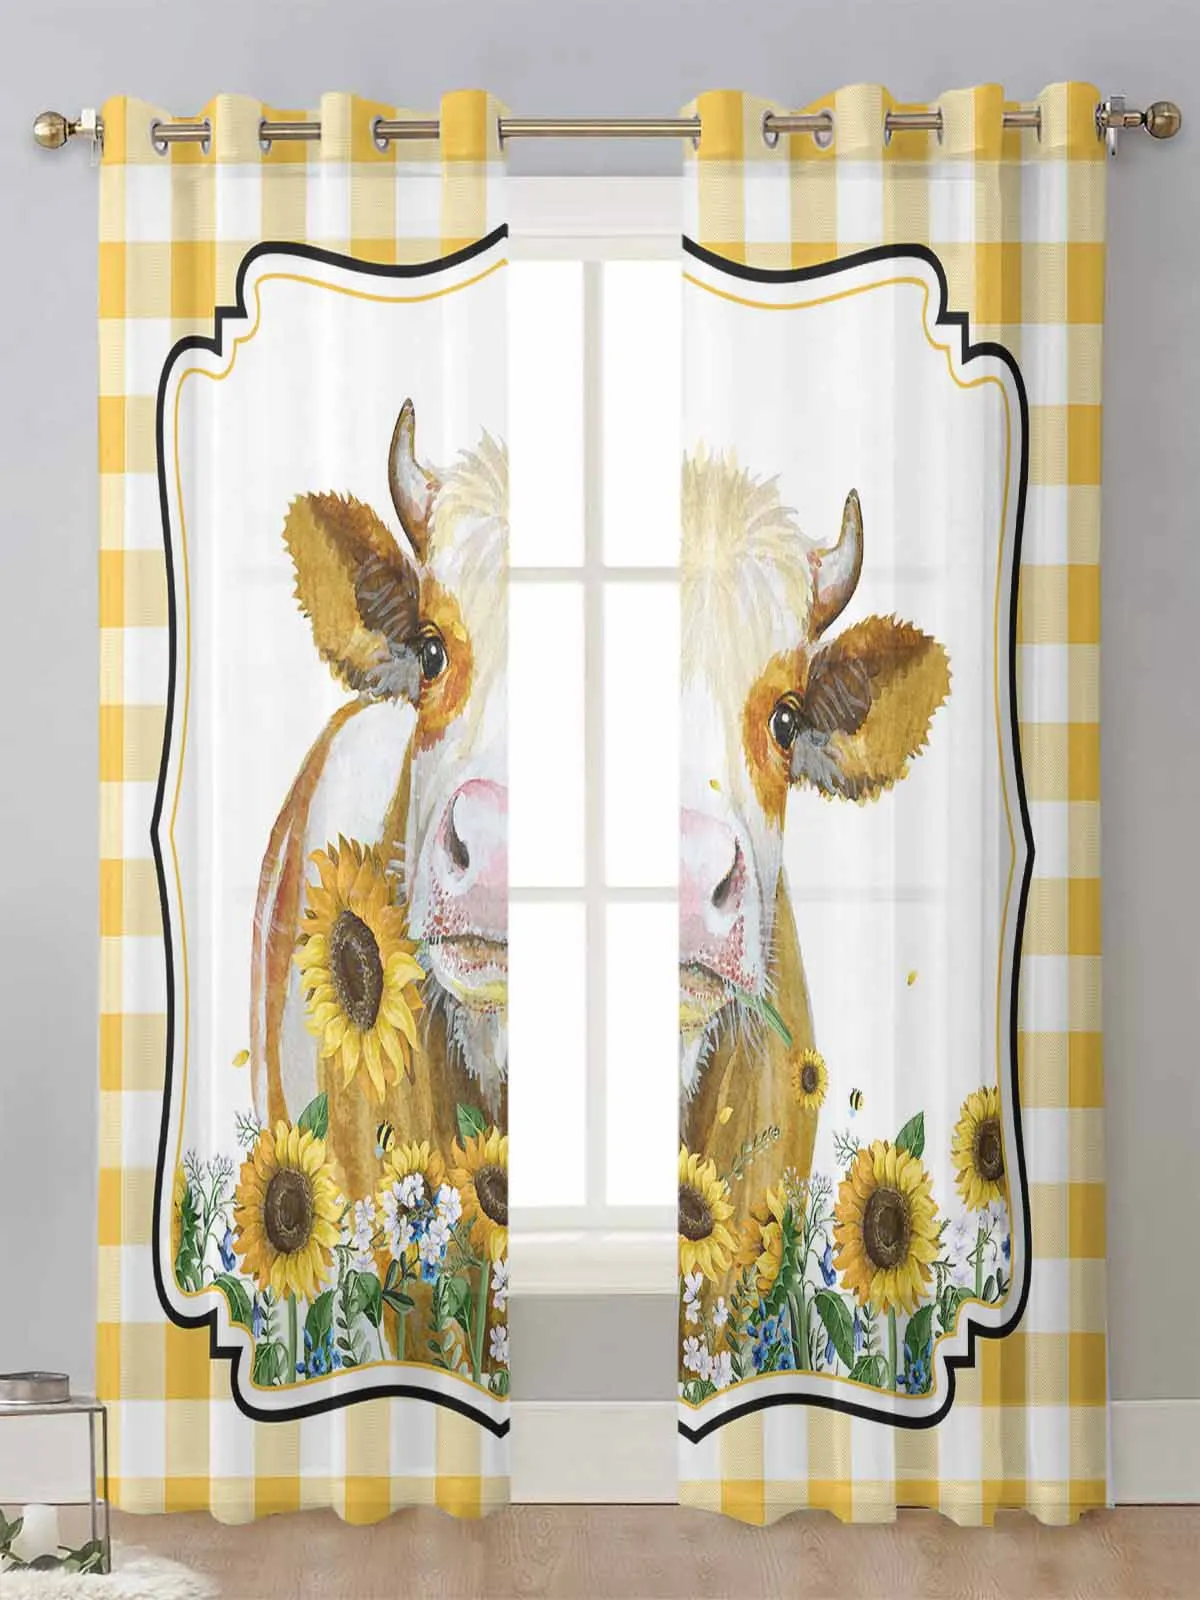 

American Country Style Farm Cow Sunflower Yellow Plaid Sheer Curtains Living Room Window Voile Tulle Curtain Drapes Home Decor